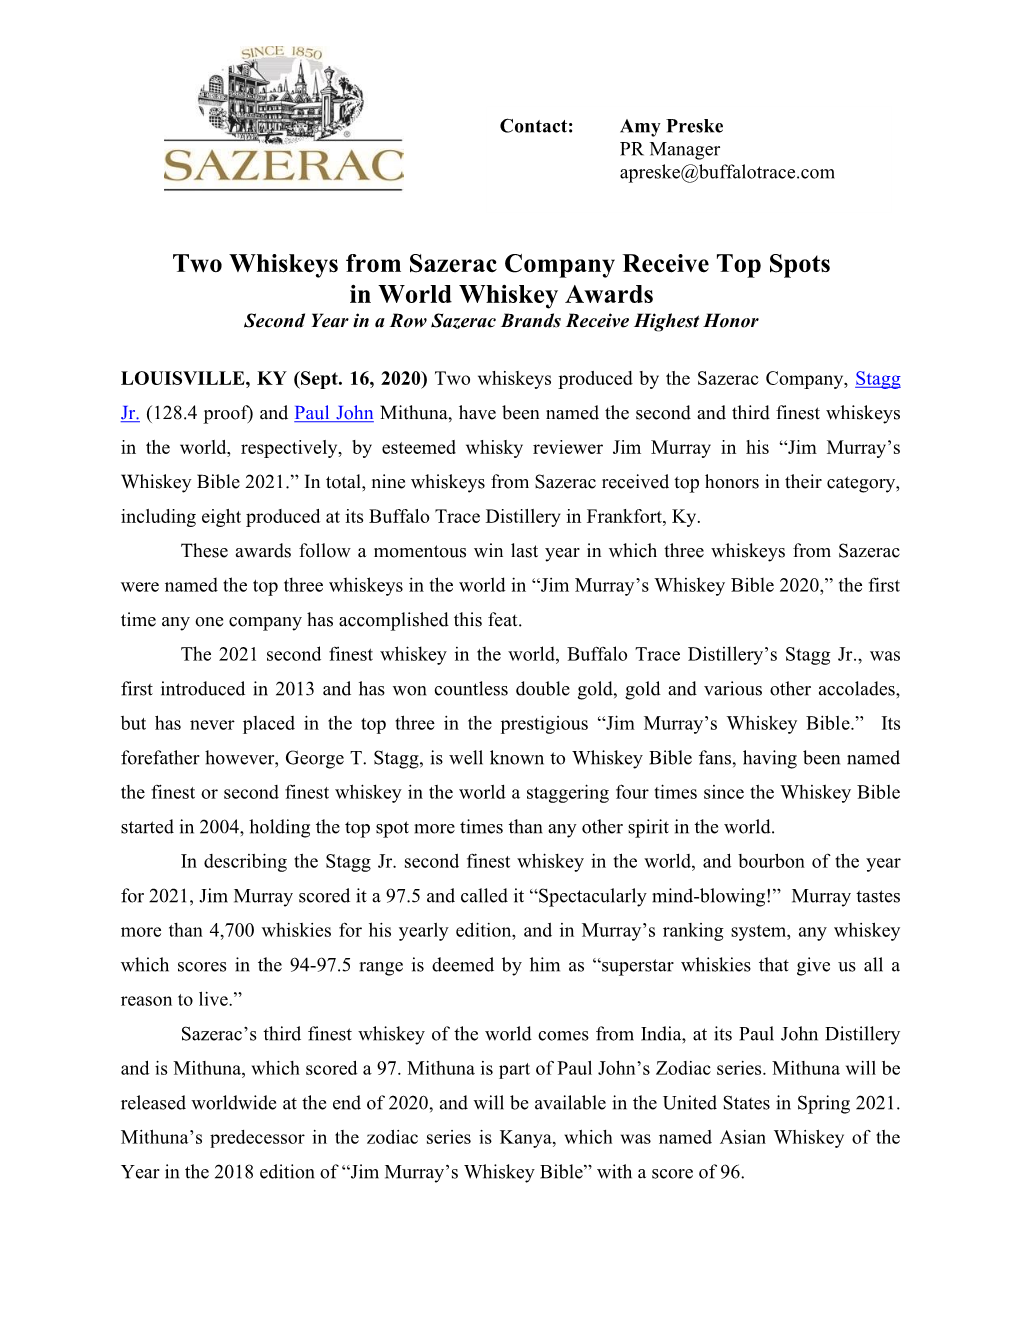 Two Whiskeys from Sazerac Company Receive Top Spots in World Whiskey Awards Second Year in a Row Sazerac Brands Receive Highest Honor